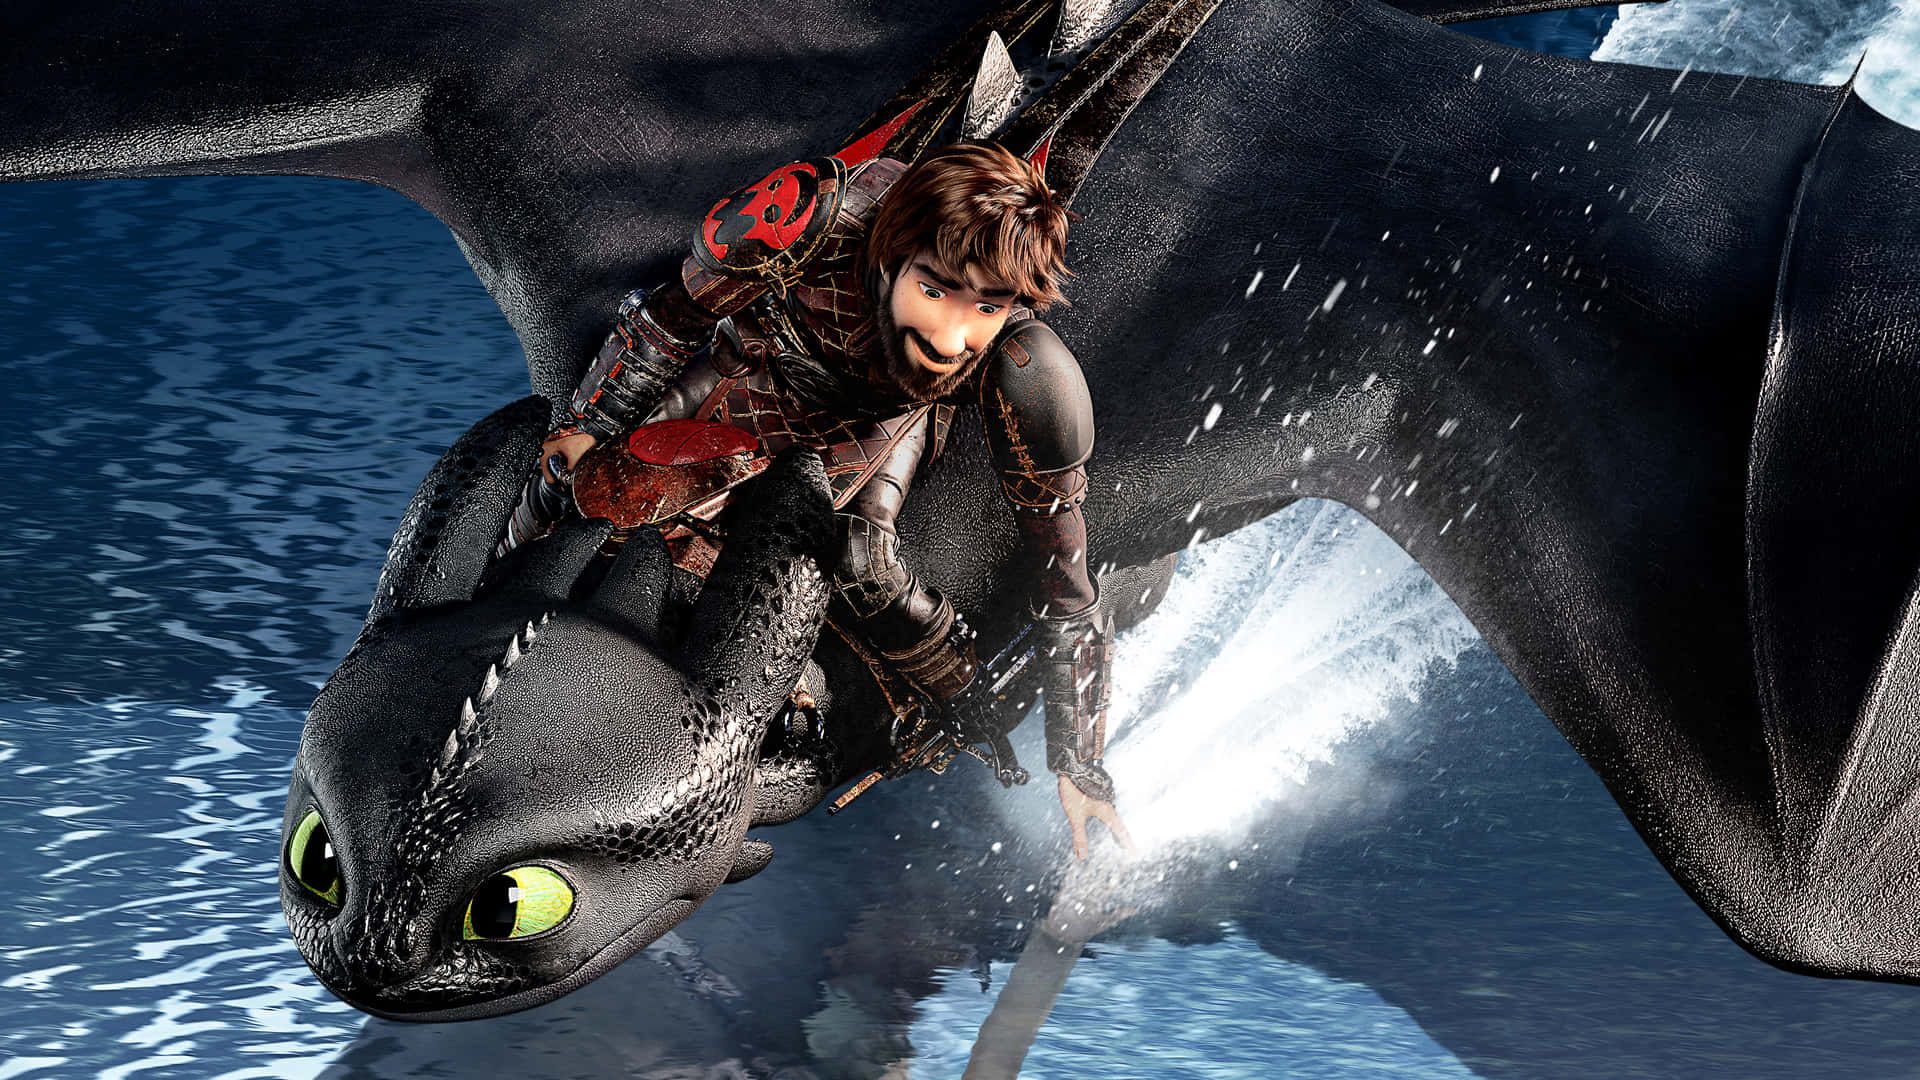 Free How To Train Your Dragon The Hidden World Wallpaper Downloads, [100+]  How To Train Your Dragon The Hidden World Wallpapers for FREE |  